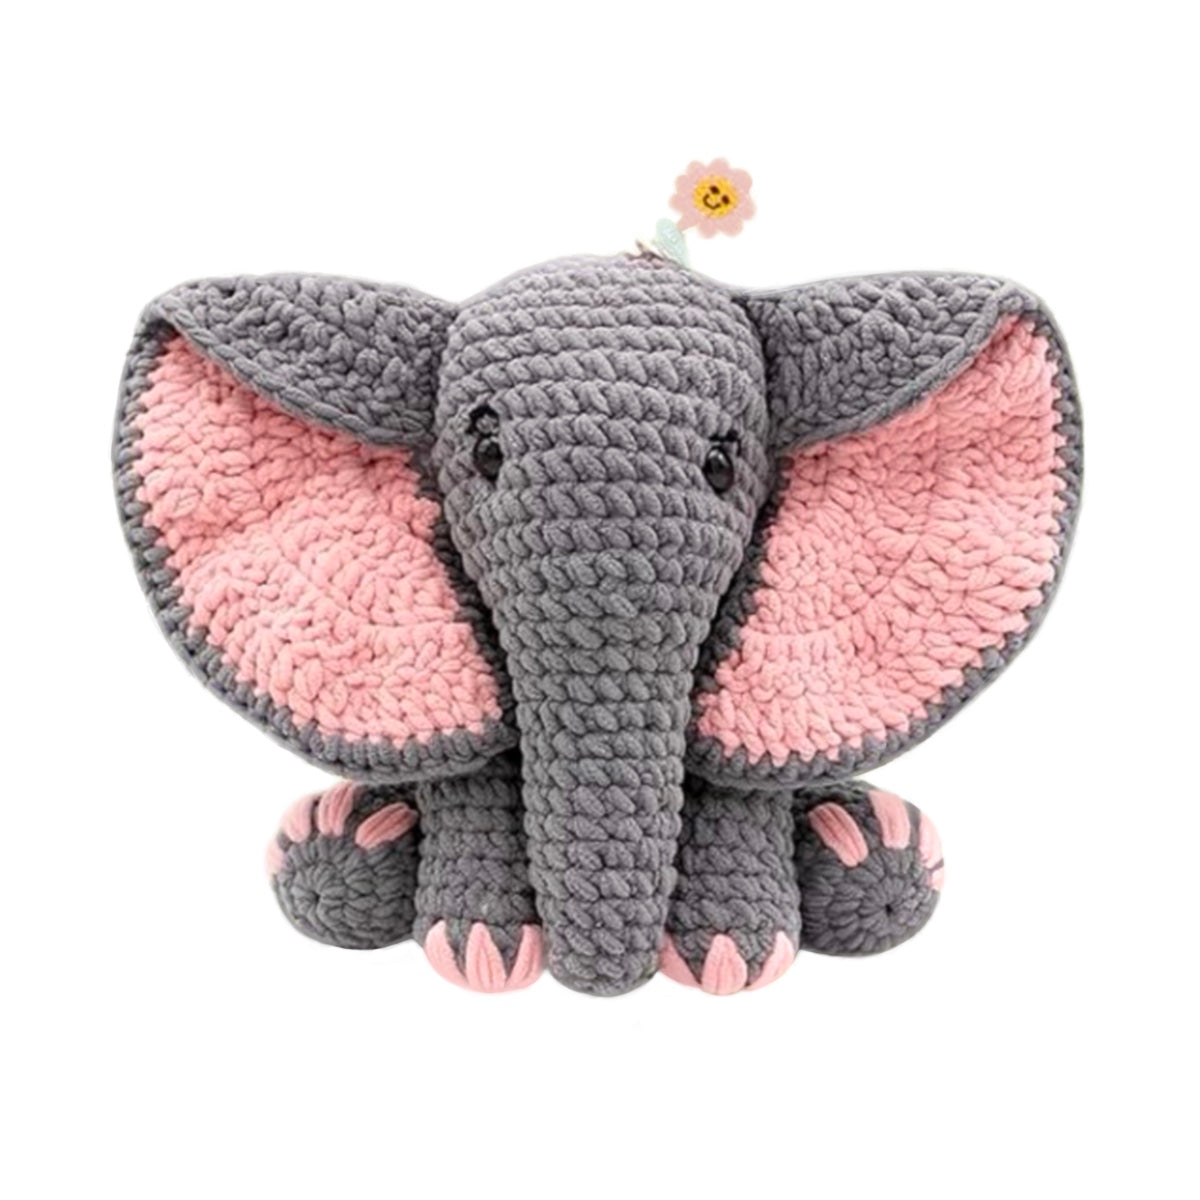 Crochet Kit for Beginners,13in Crochet Animal Kit Elephant,Crochet Starter Kit Gift for Adults Kids with Yarn Sets,Amigurumi Crochet Kits with Step-by-Step Video Tutorials. - Moss Artistry